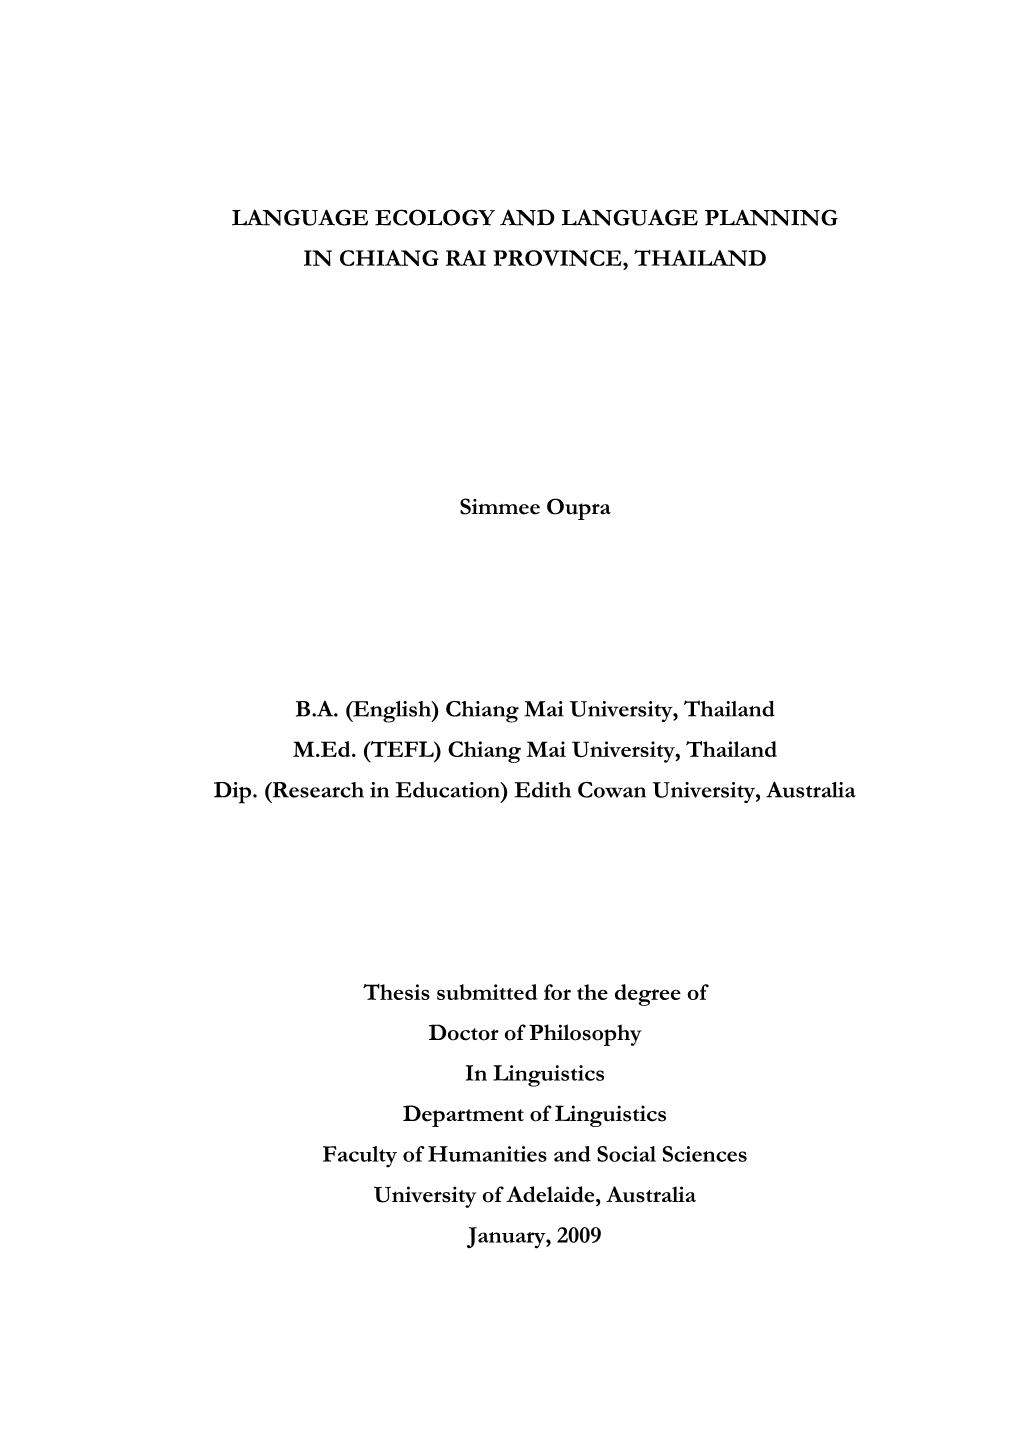 Language Ecology and Language Planning in Chiang Rai Province, Thailand